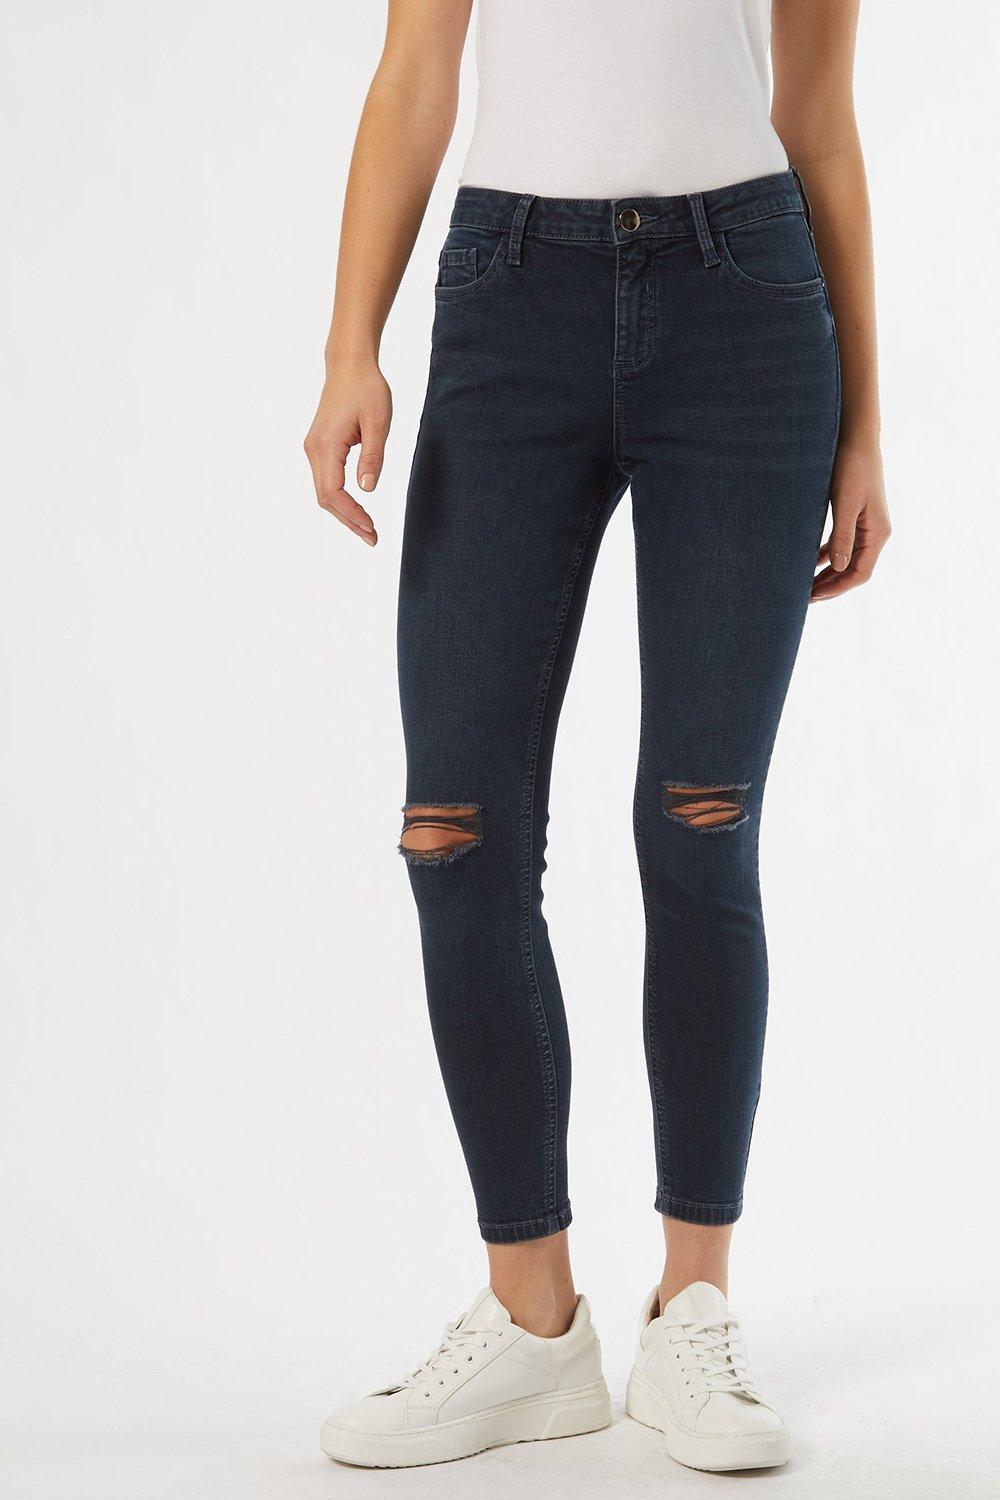 Dorothy Perkins Mid Rise High-Stretch Authentic skinny jeans in Black and Blue